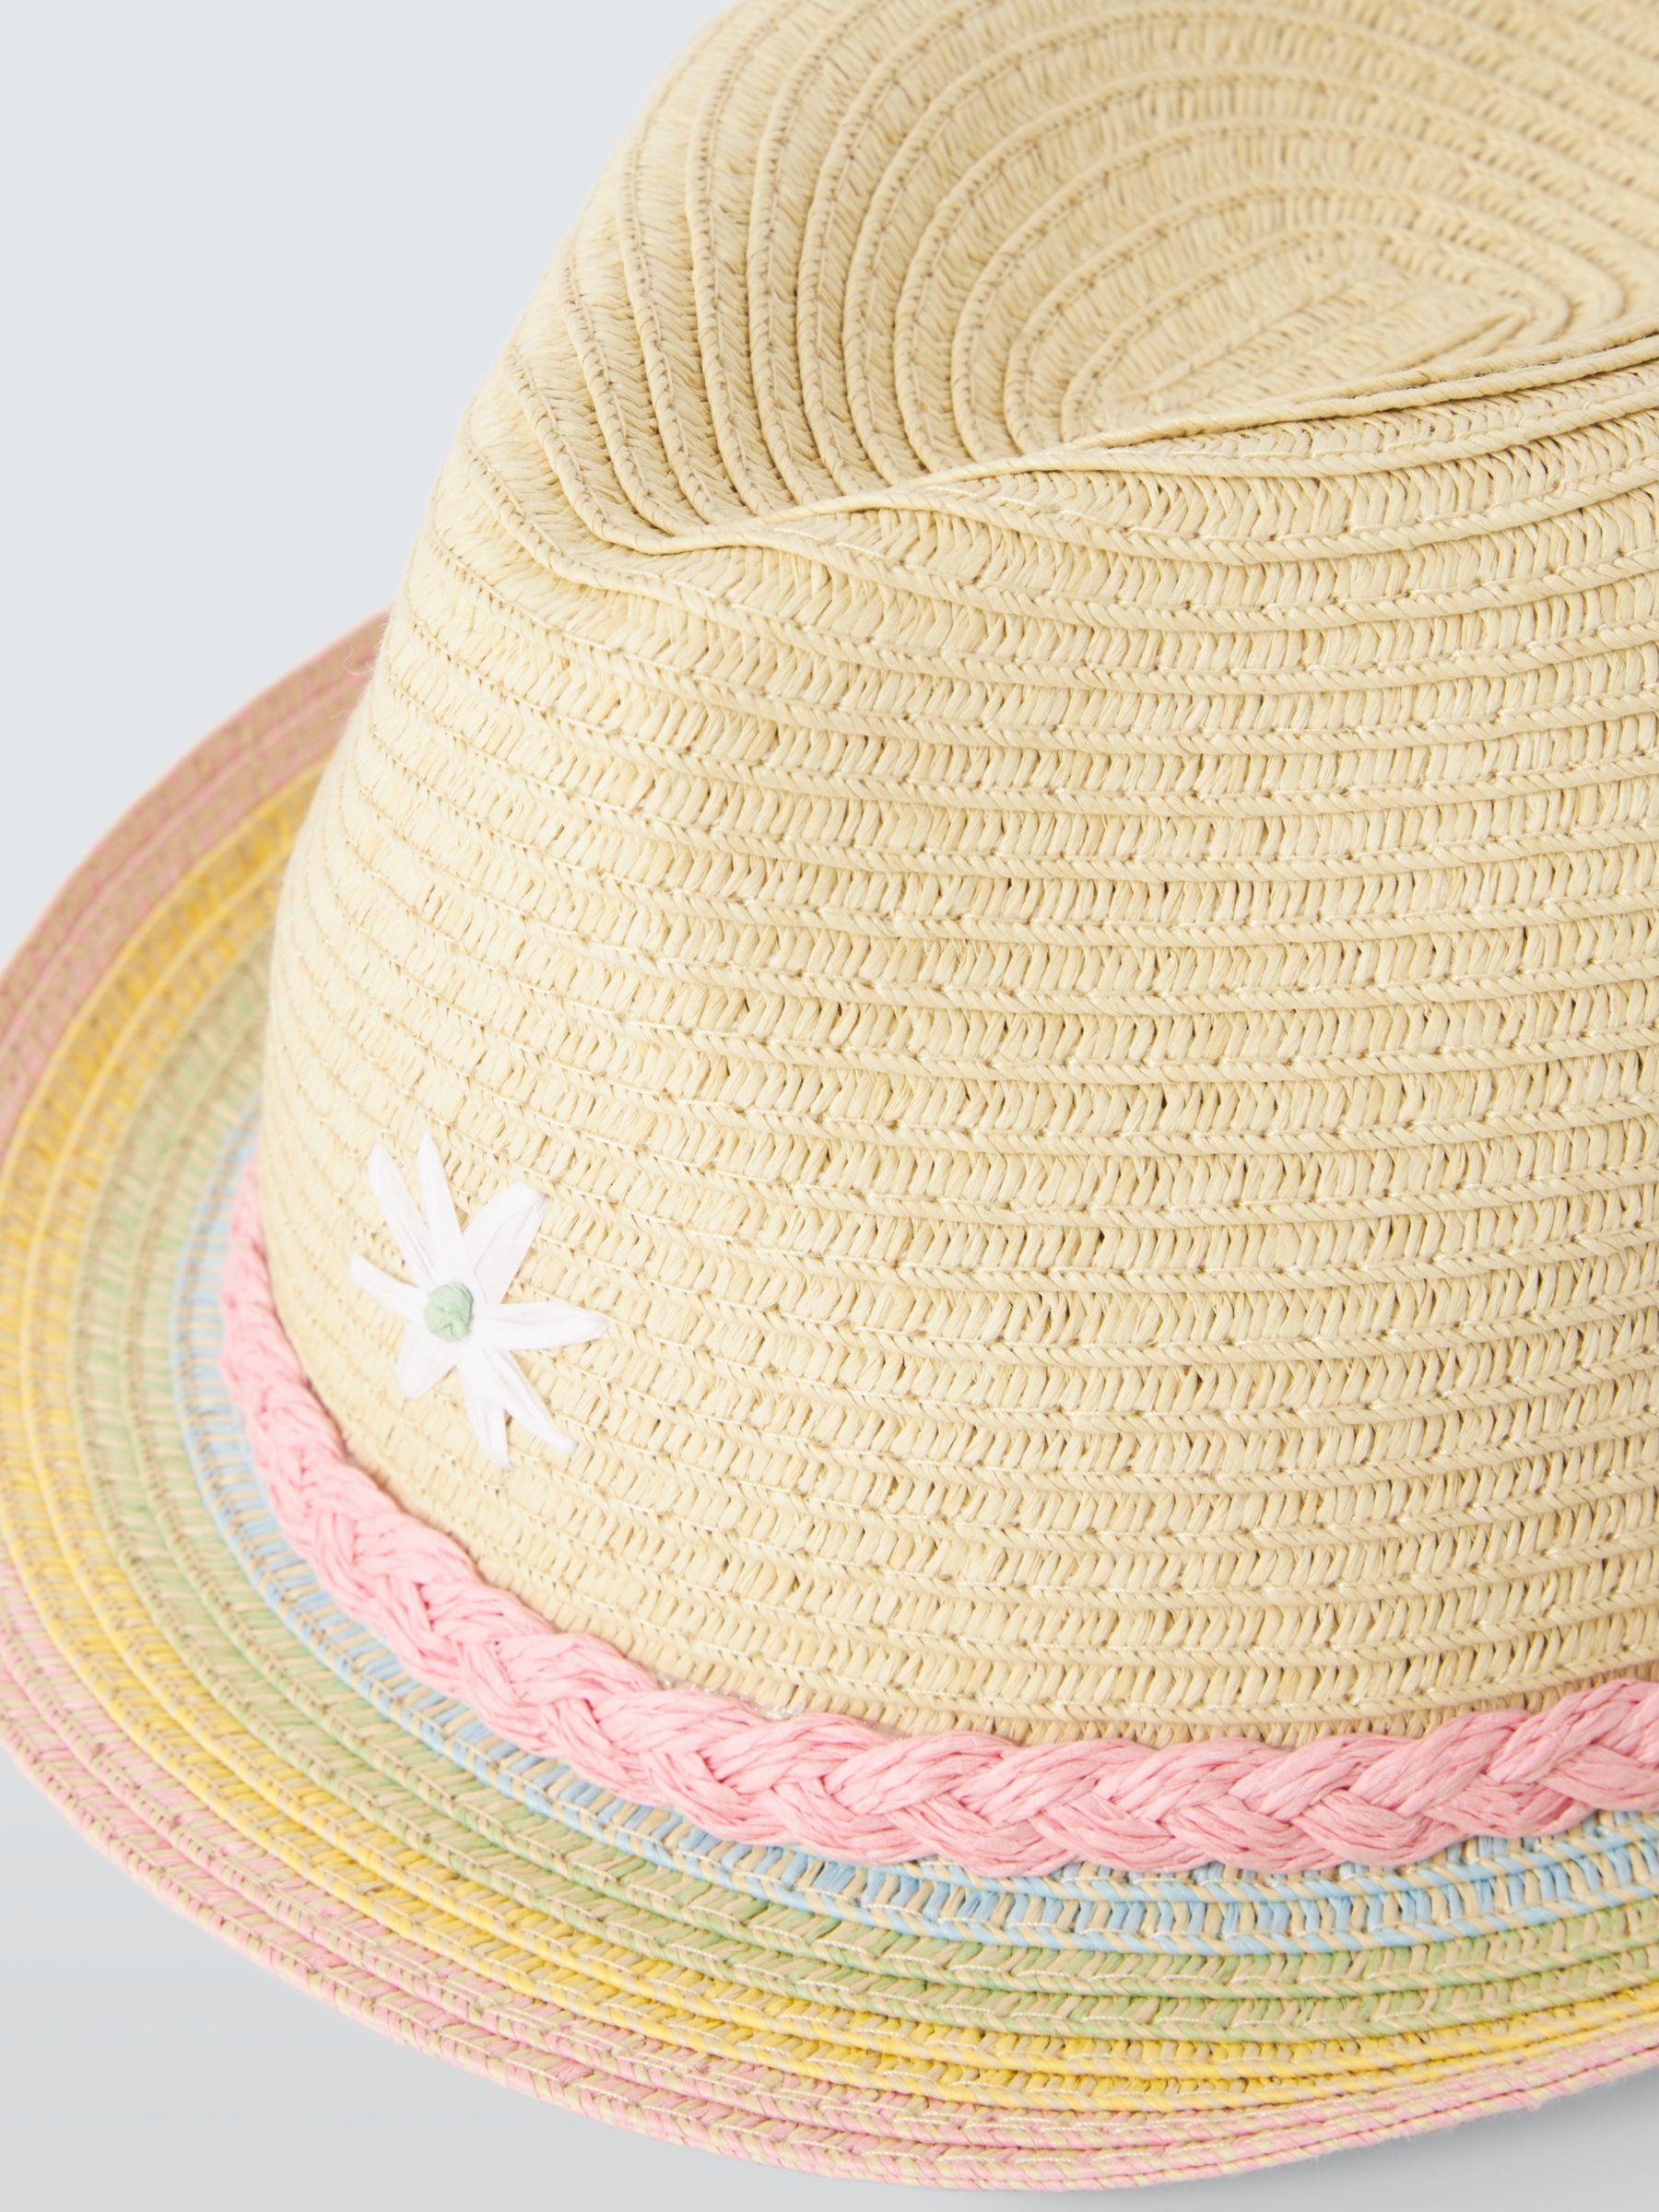 John Lewis Kids' Pastel Daisy Weave Trilby Hat, Natural/Multi, 6-8 years